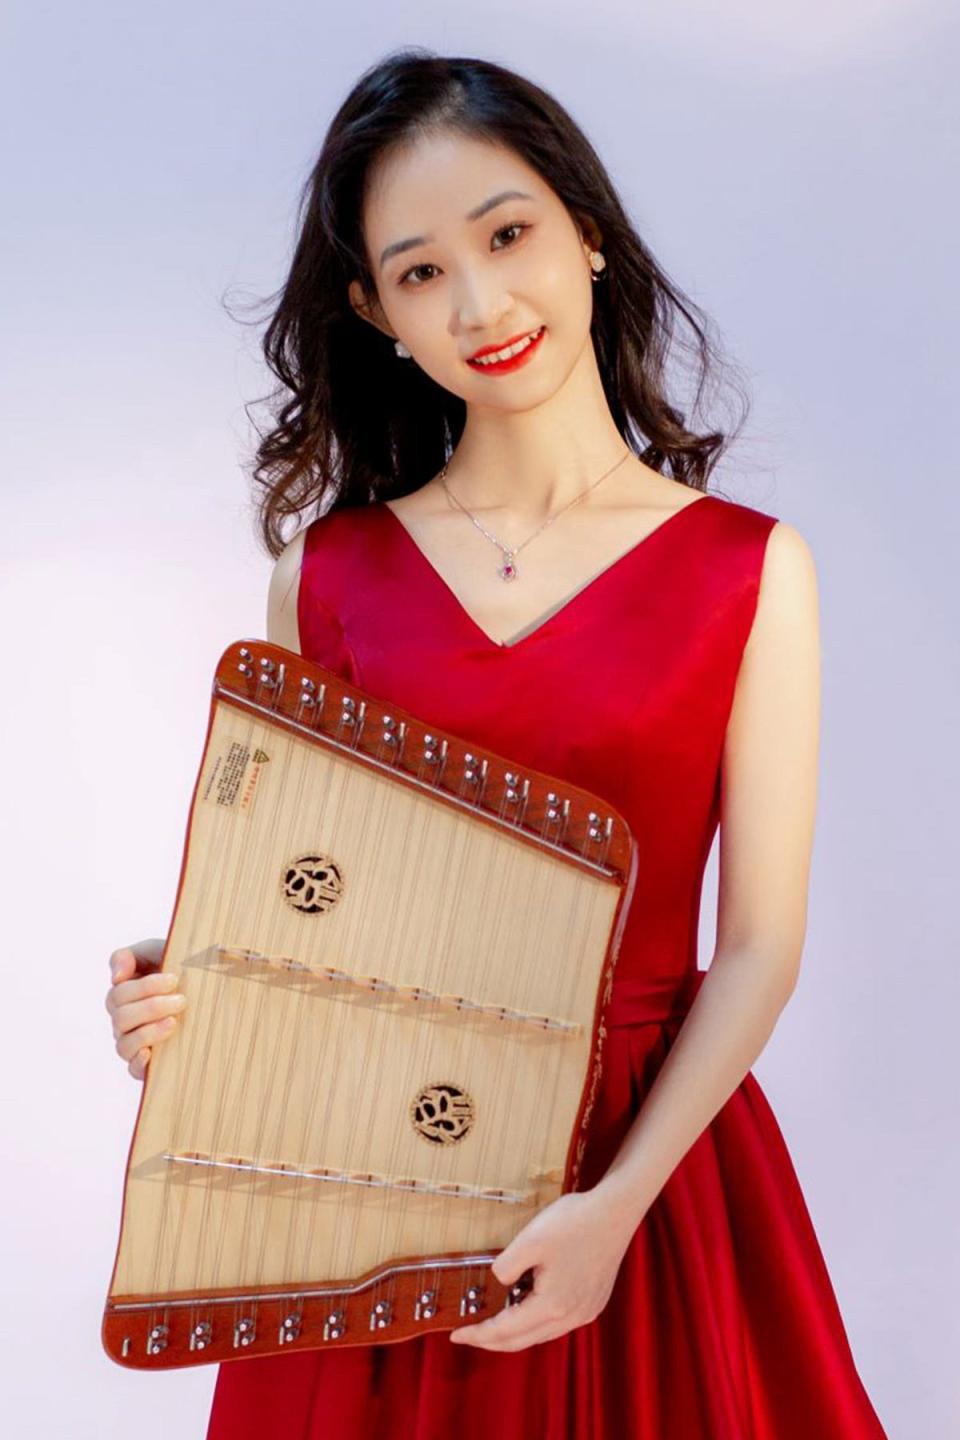 Lyujing Liu, visiting scholar at Middle Tennessee State University Center for Chinese Music and Culture, MTSU School of Music